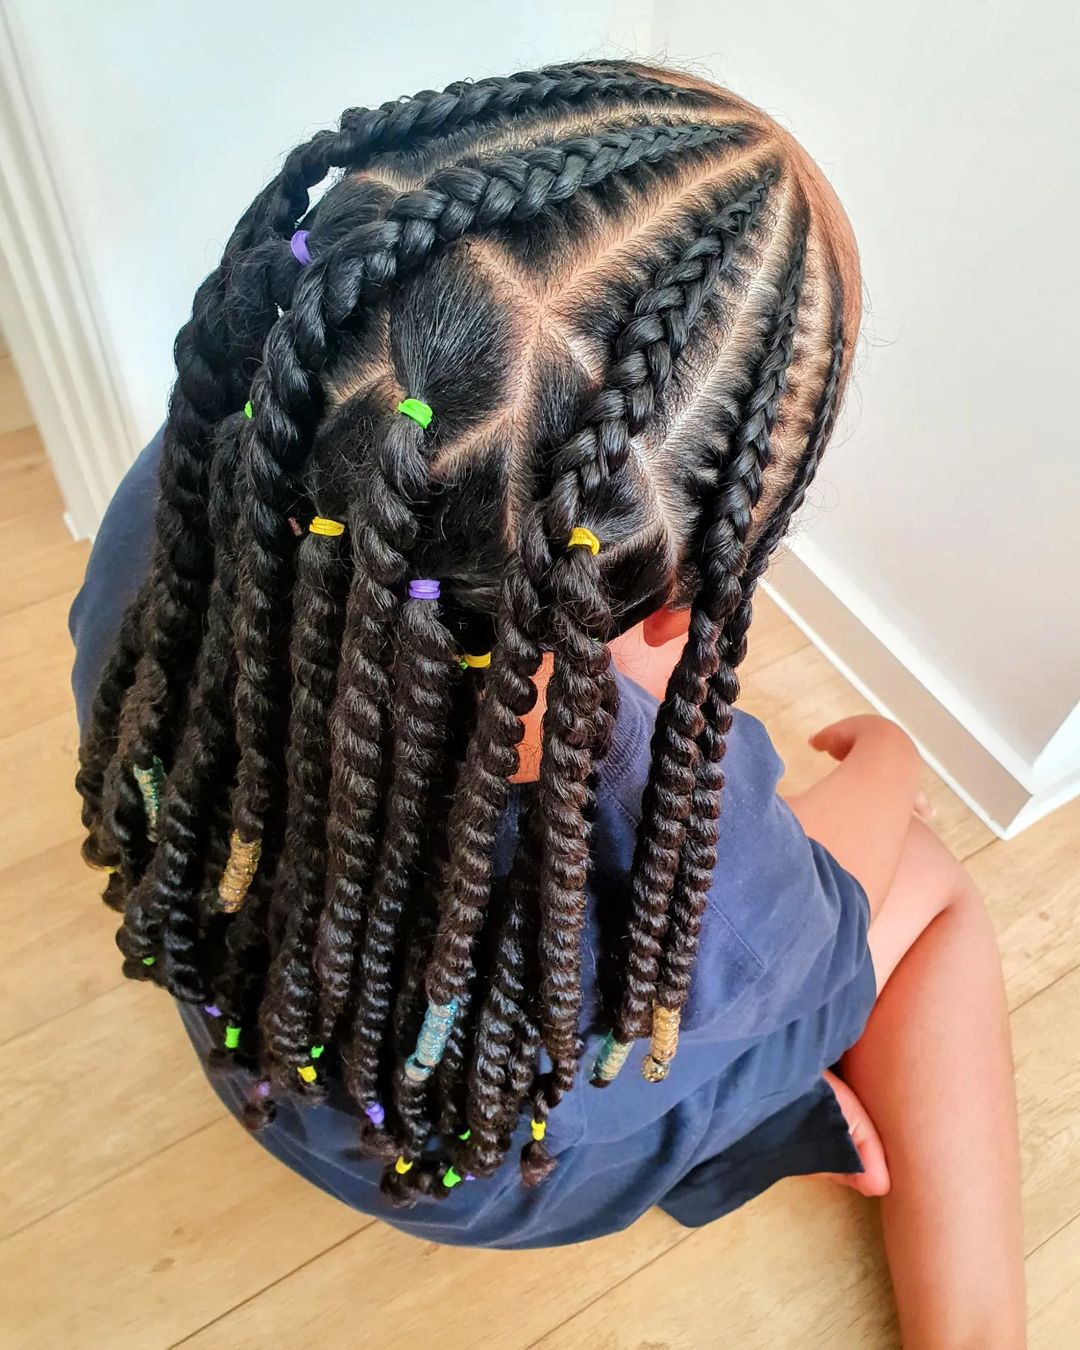 19. Medium Cornrows on Individual Twists With Colorful Bands